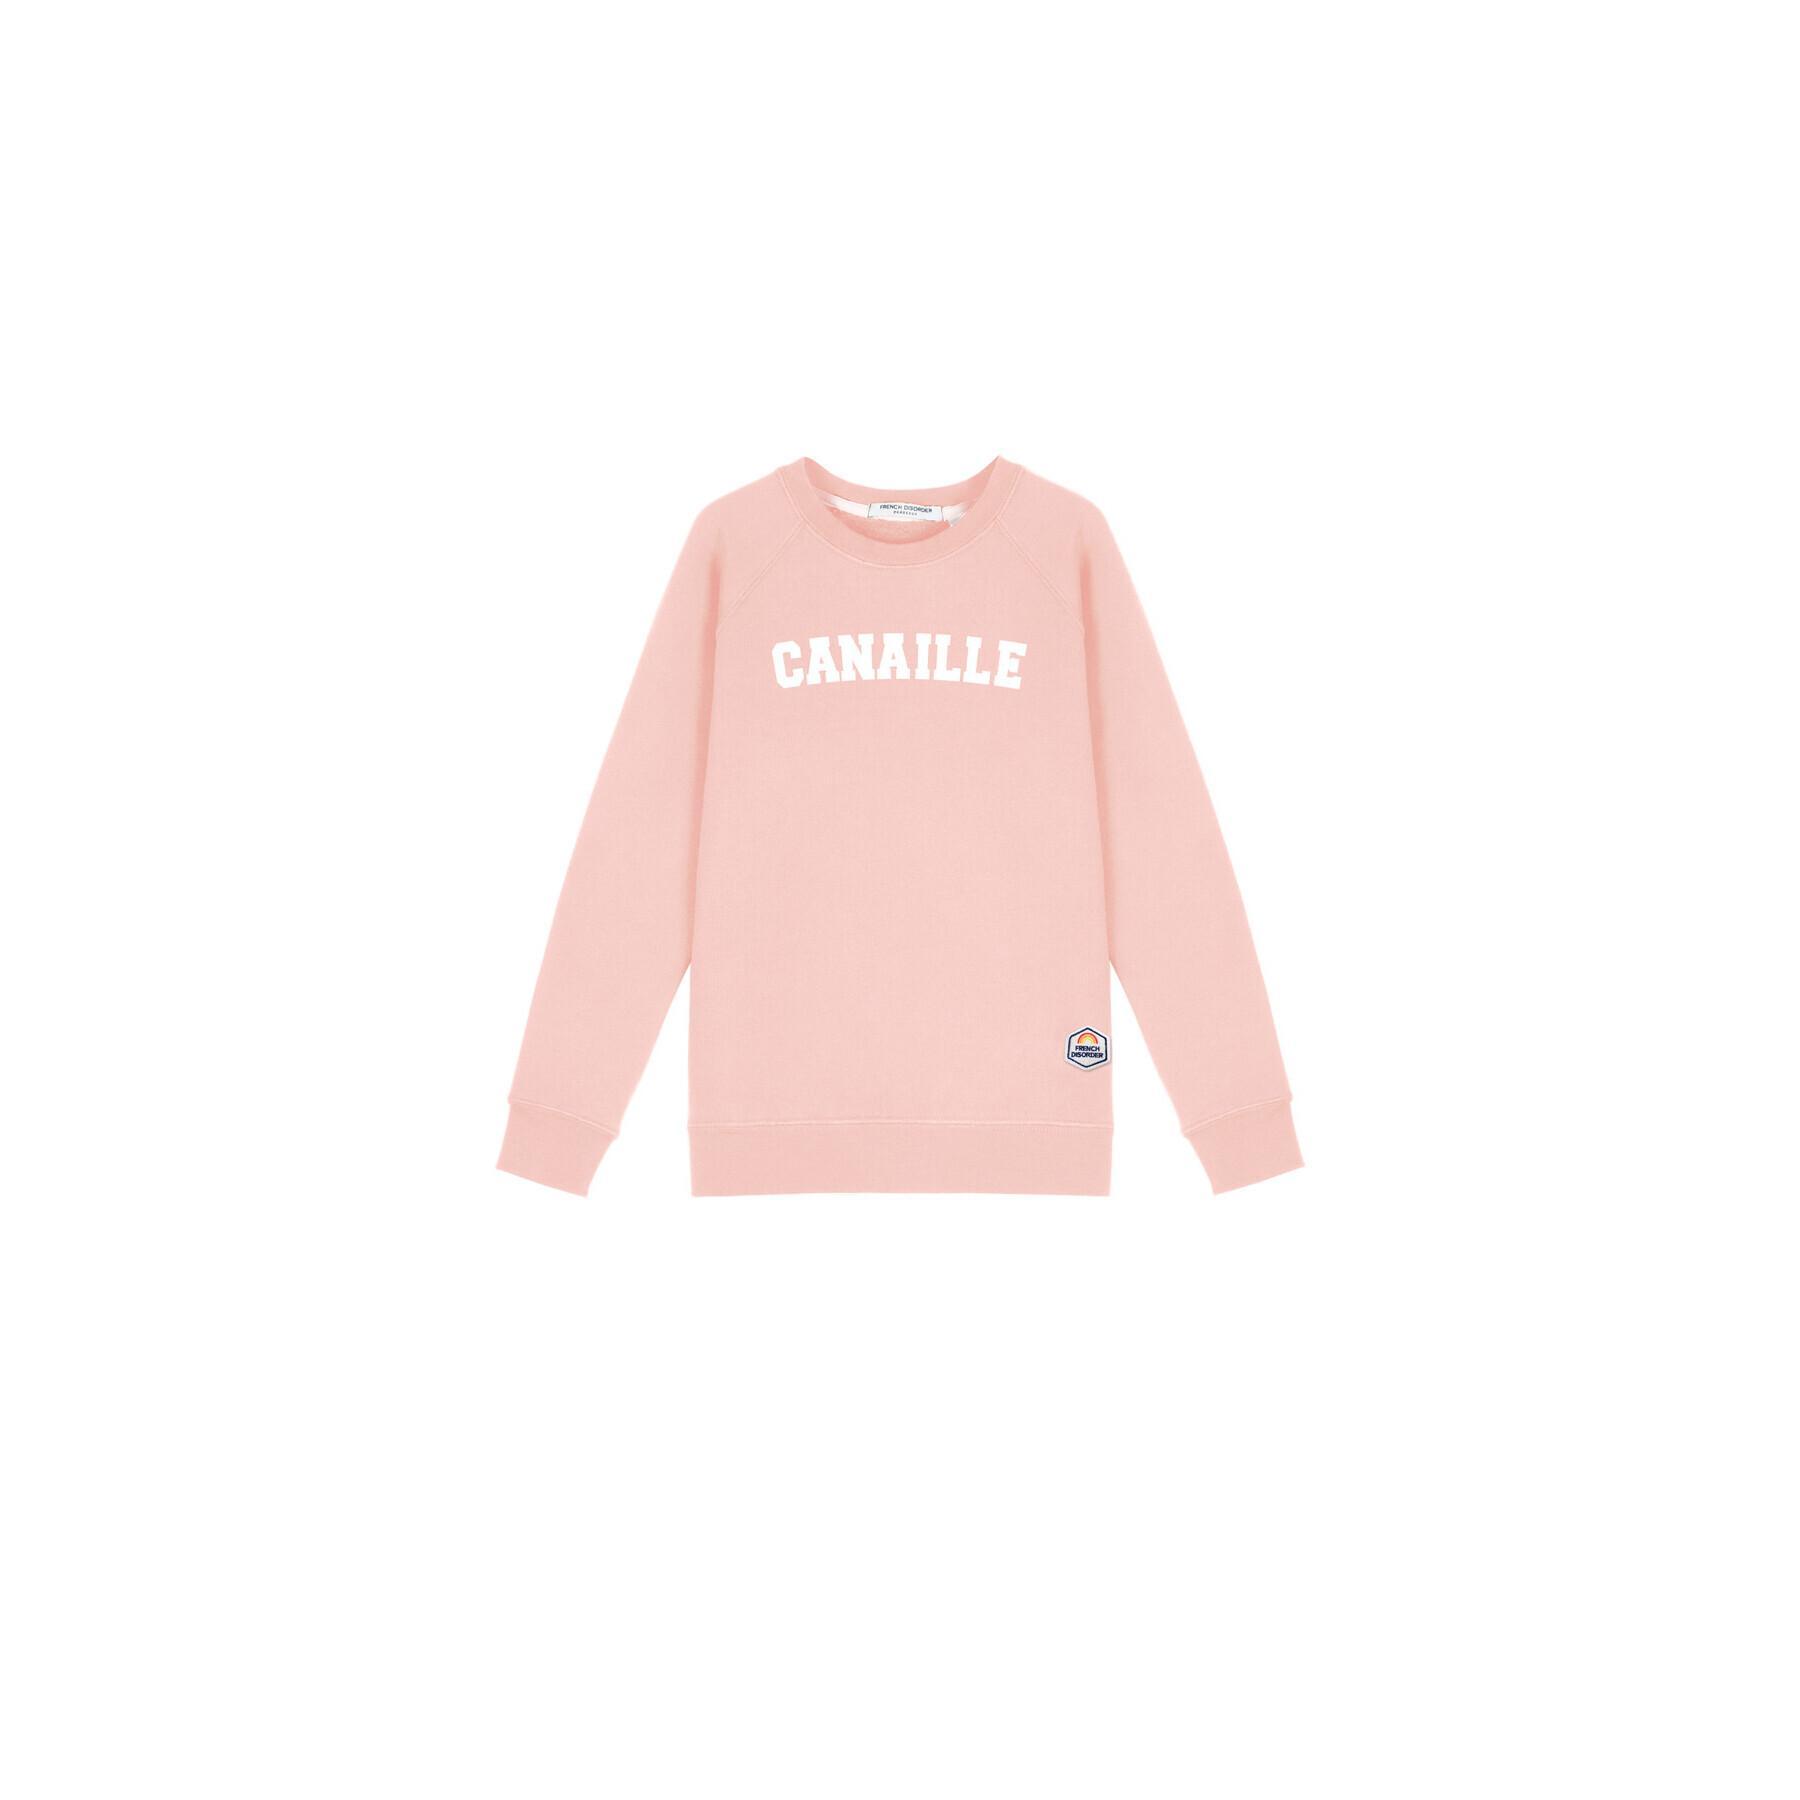 Junior Sweatshirt French Disorder Billy Canaille